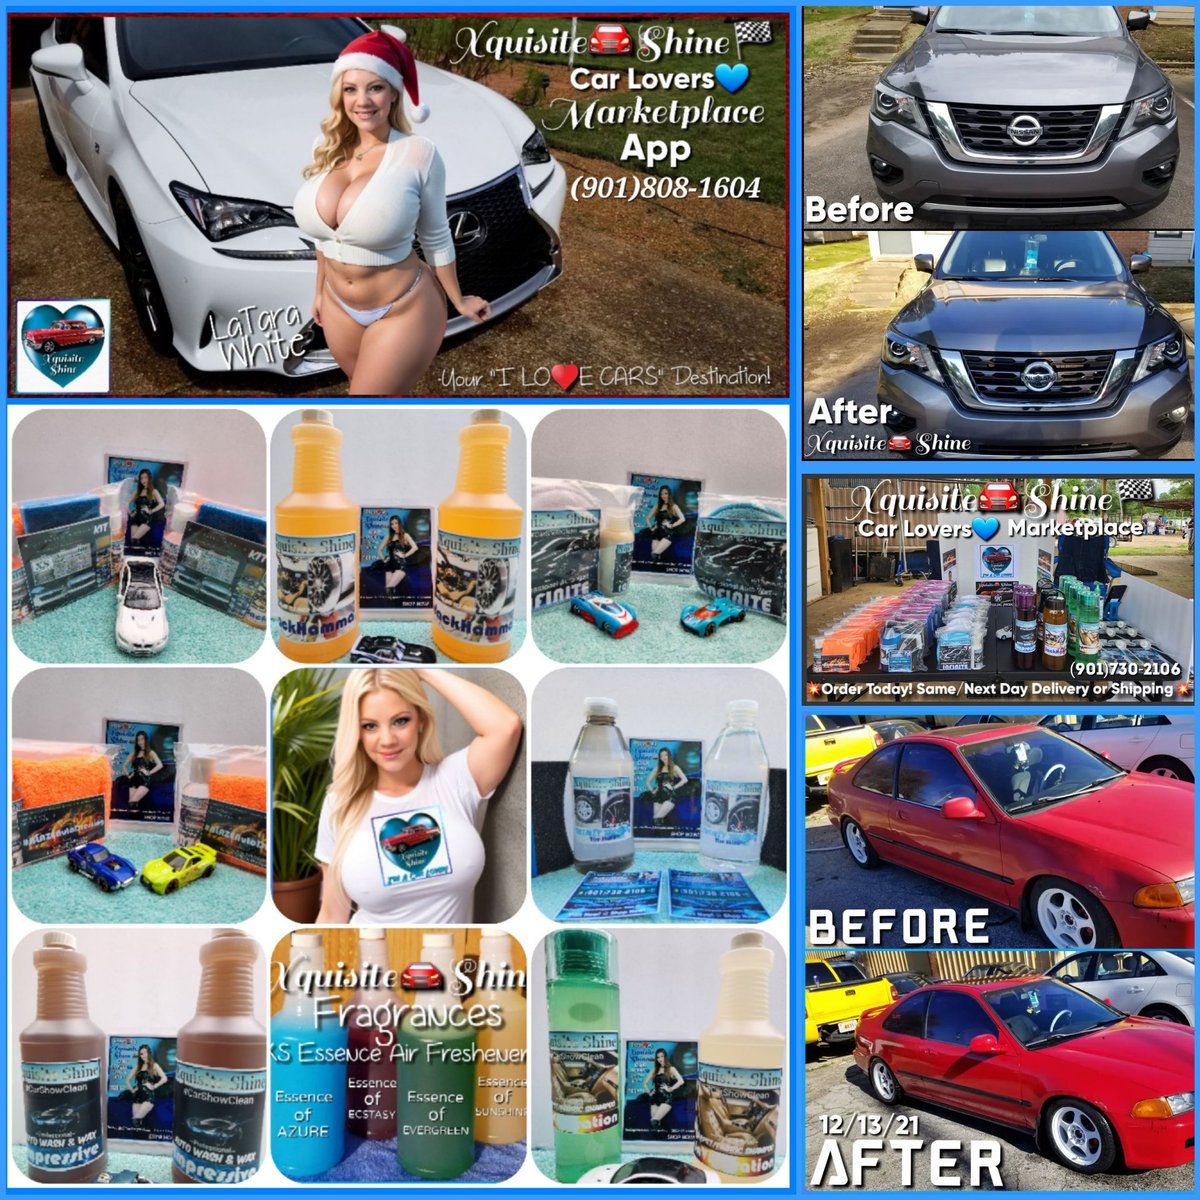 Keep Your Automotives 'Car Show Clean' with our Xquisite🚘Shine🏁
Detailing Products and Chemicals.
facebook.com/story.php?id=1… ⬅️(Click Link) 💥ORDER NOW!💥
*Sales Representatives Are On Duty 24/7*

#Automotive #Cars #Detailing #CarLovers #Racing